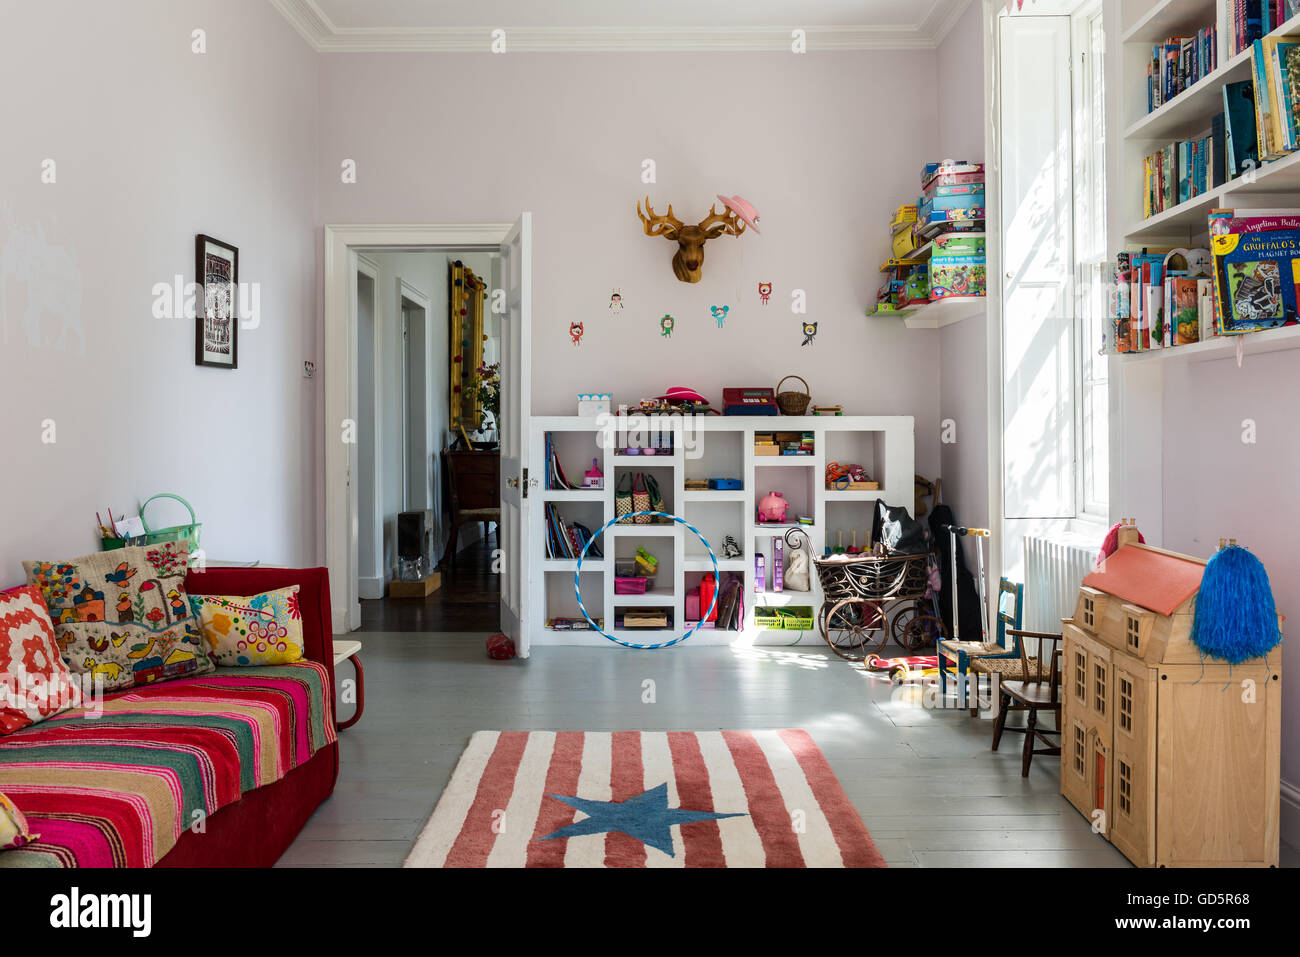 Childrens playroom with painted gray floorboards and stars and stripe rug Stock Photo